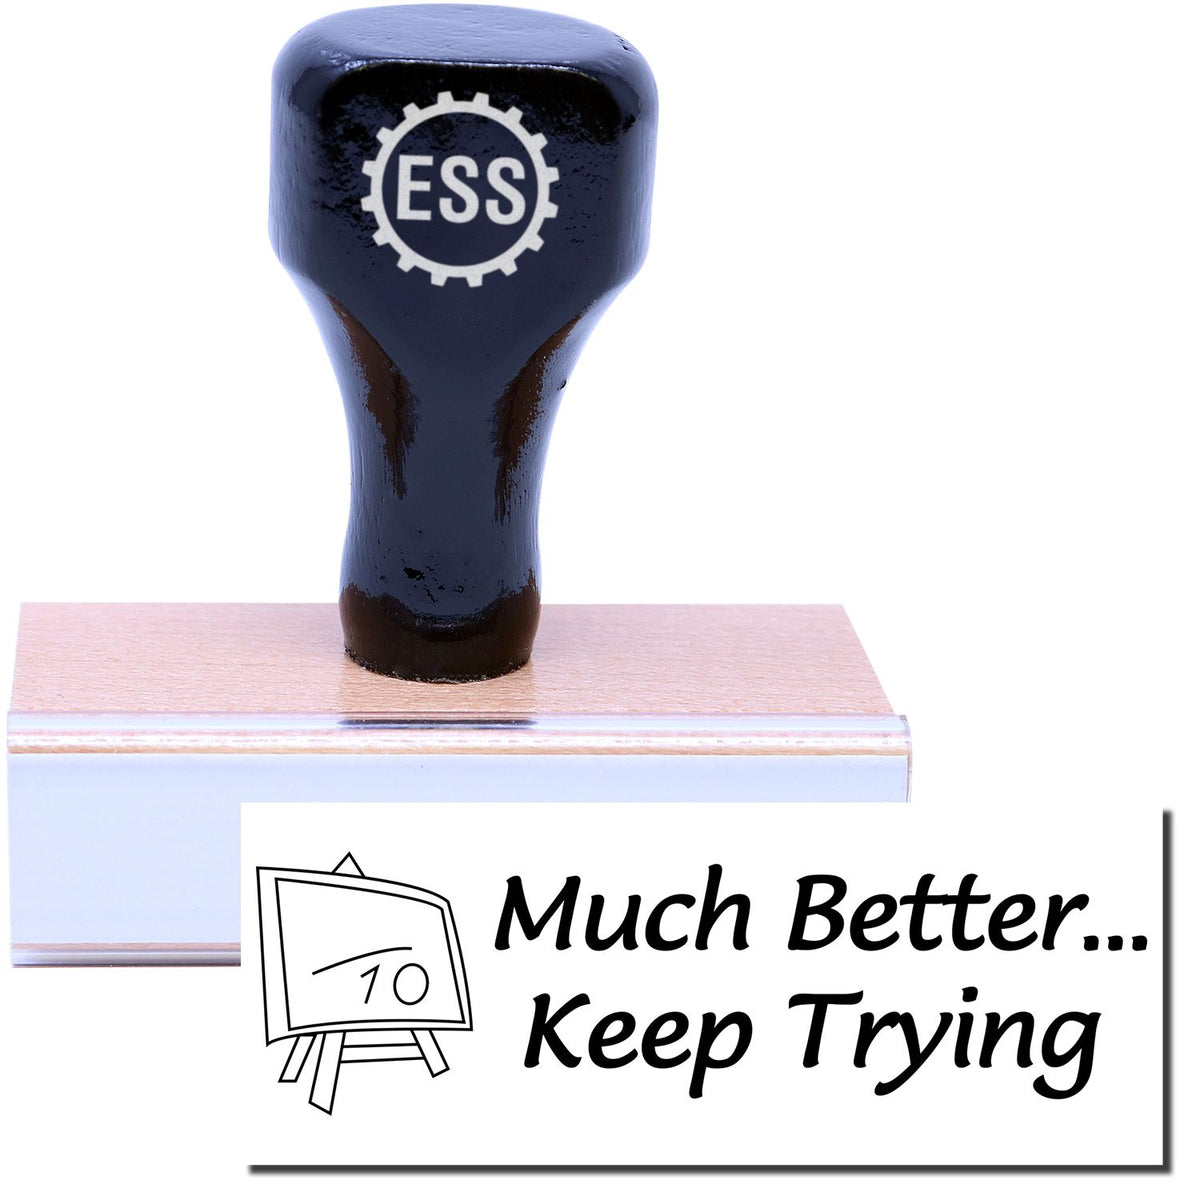 A stock office rubber stamp with a stamped image showing how the text &quot;Much Better... Keep Trying&quot; in a large font with an image showing a blackboard with a line over the number 10 is displayed after stamping.